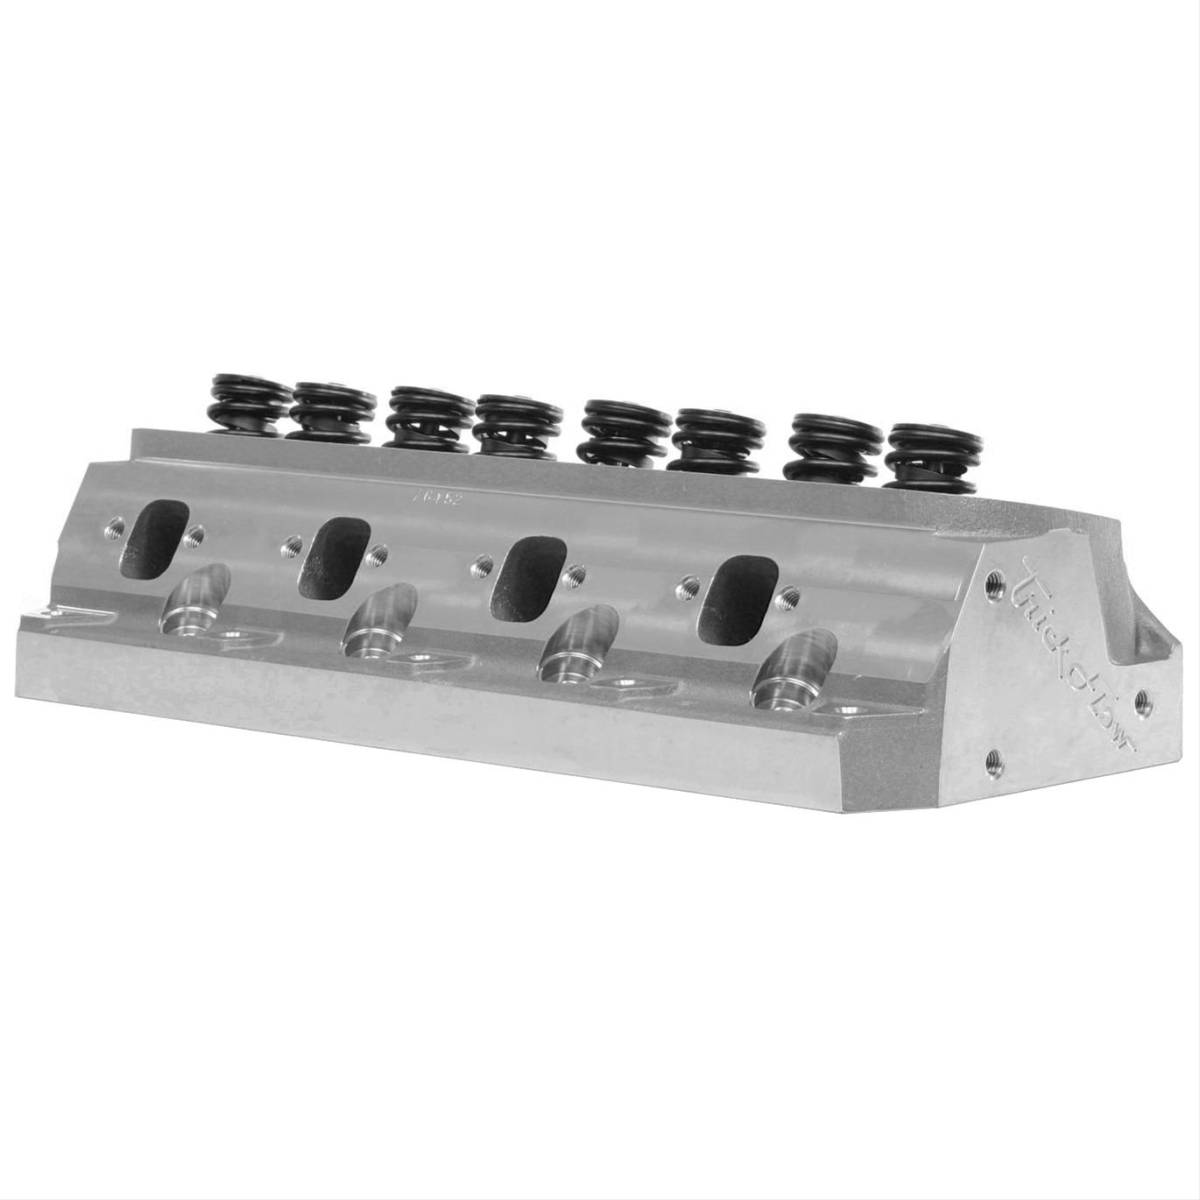 Trickflow - Trickflow Twisted Wedge SBF 170cc Cylinder Heads Single Valve 58cc Max Lift .540 - Image 1